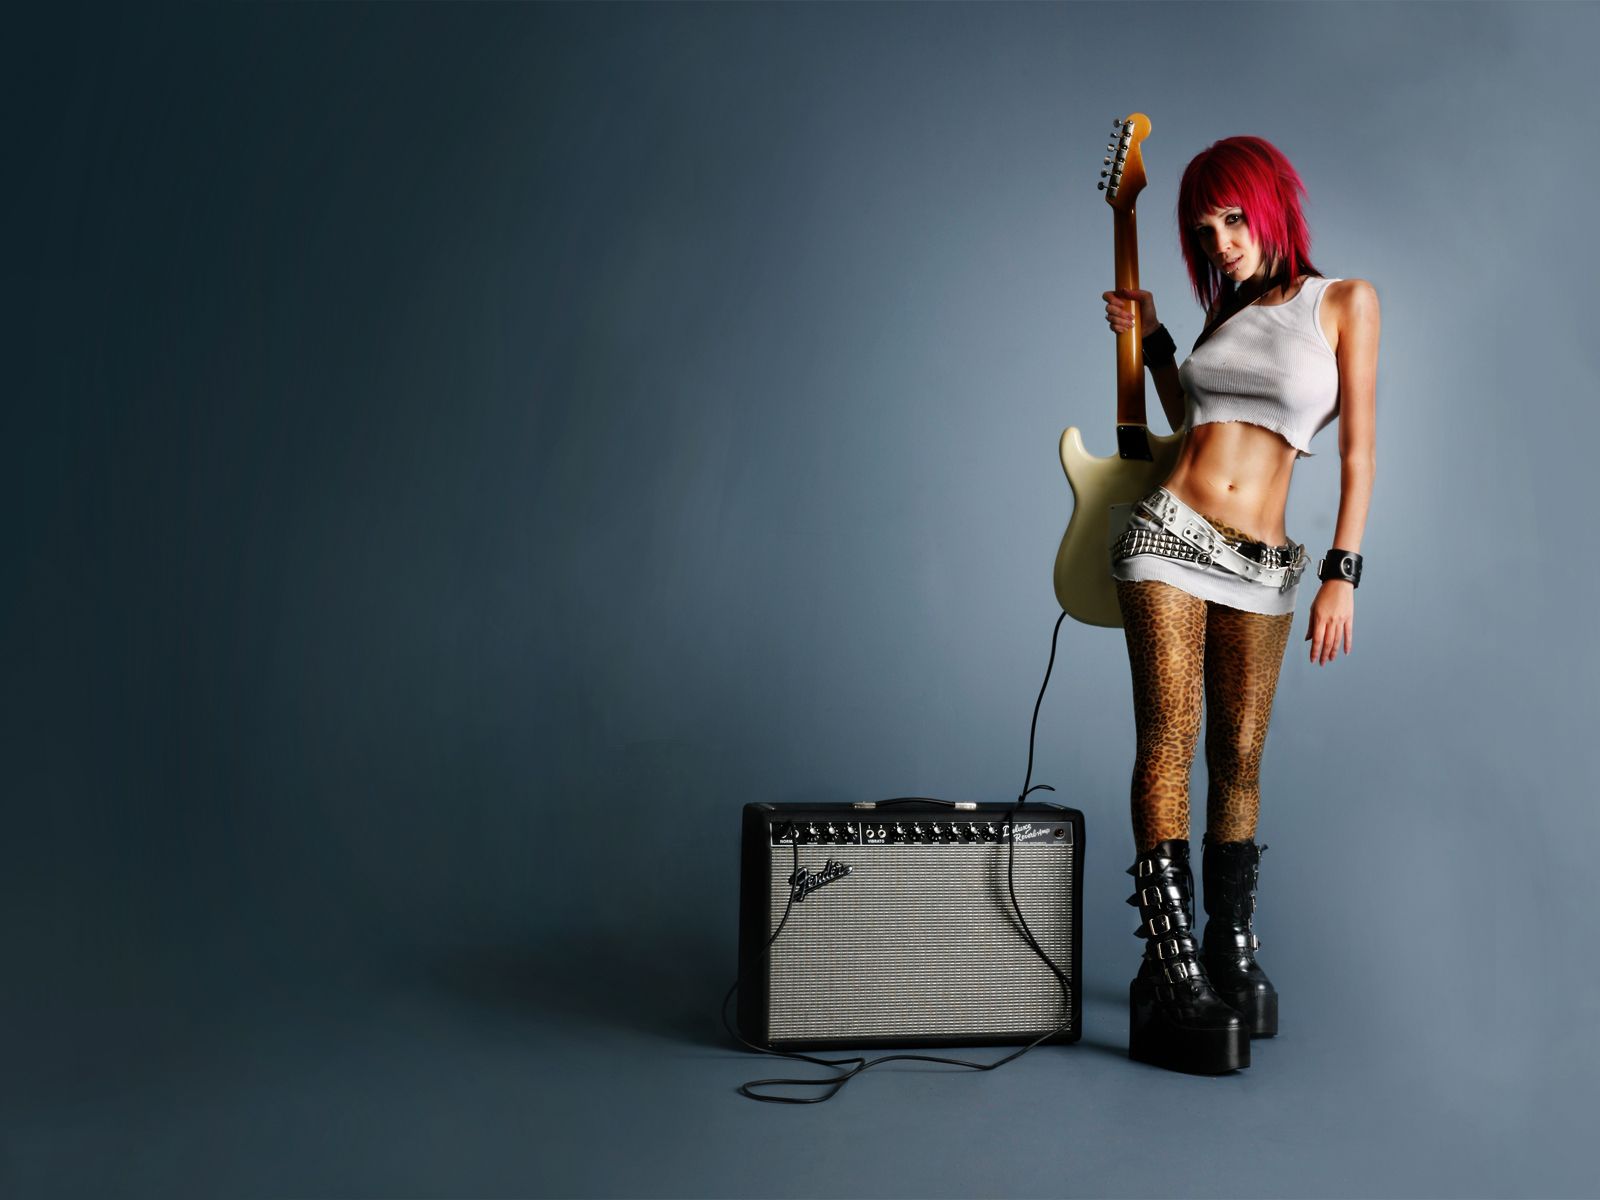 Free download redhead punk rock girl with guitar wallpaper